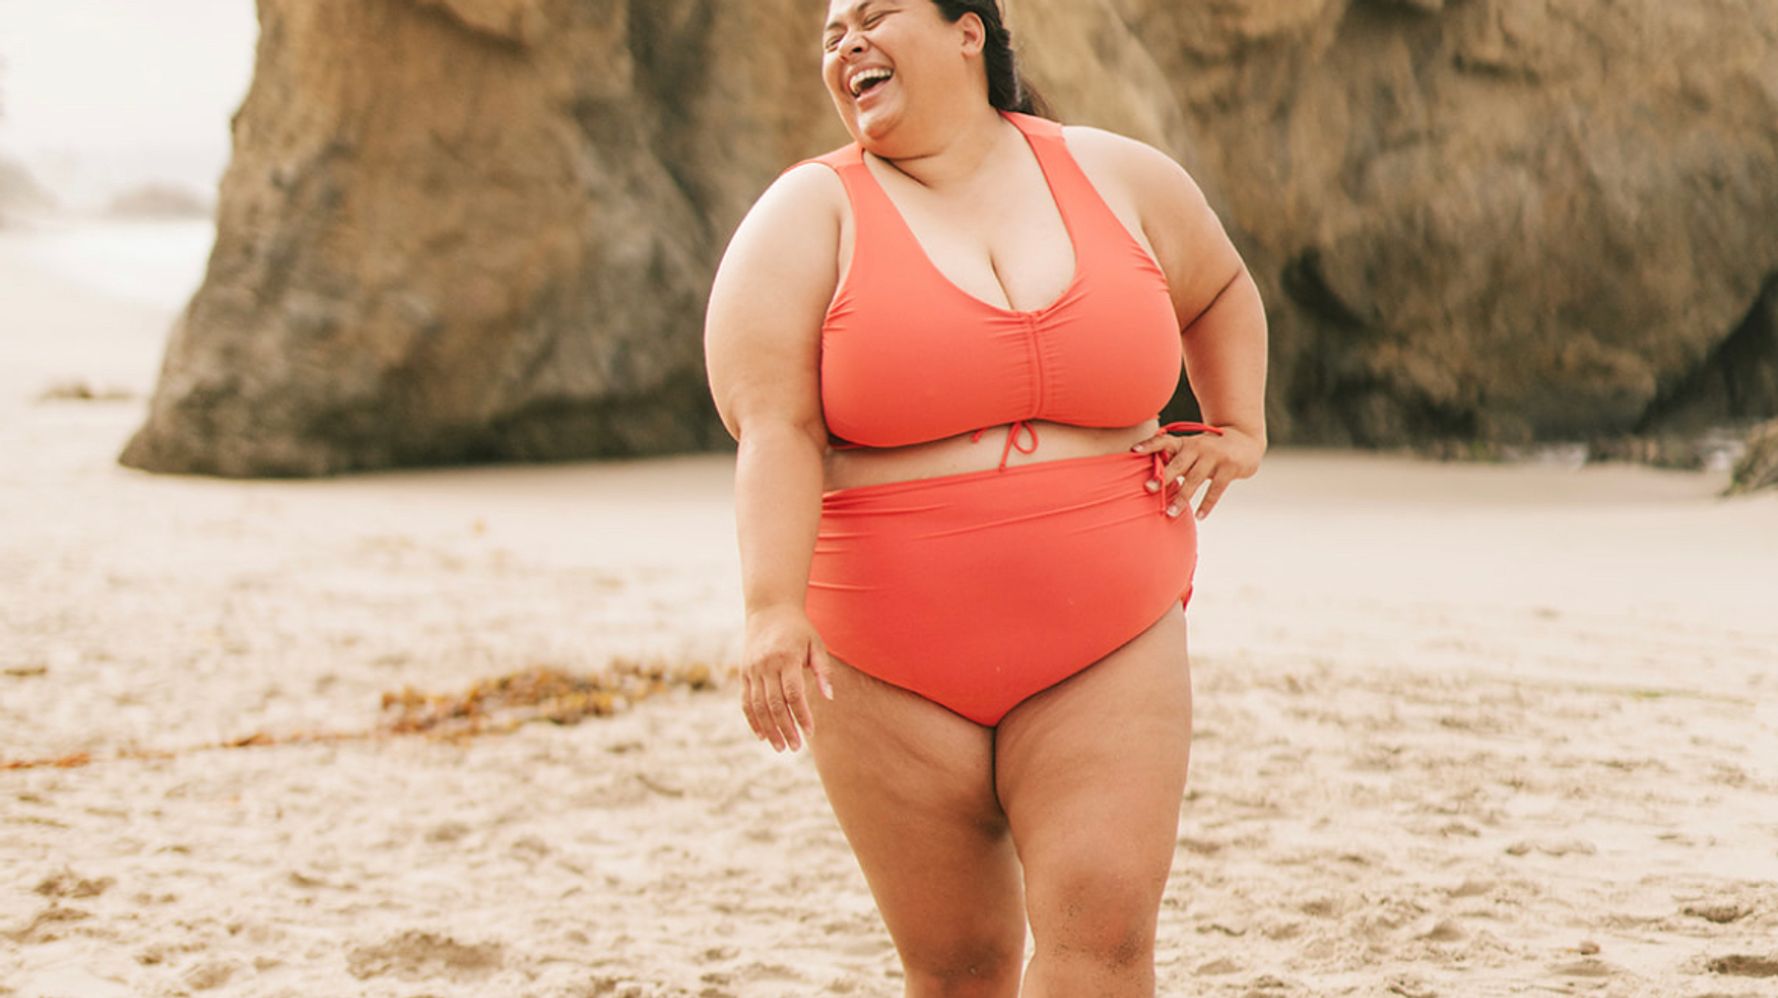 Beautiful Nude Beach Party - I Became A Bikini And Lingerie Model When I Was At My Highest Weight Ever |  HuffPost HuffPost Personal